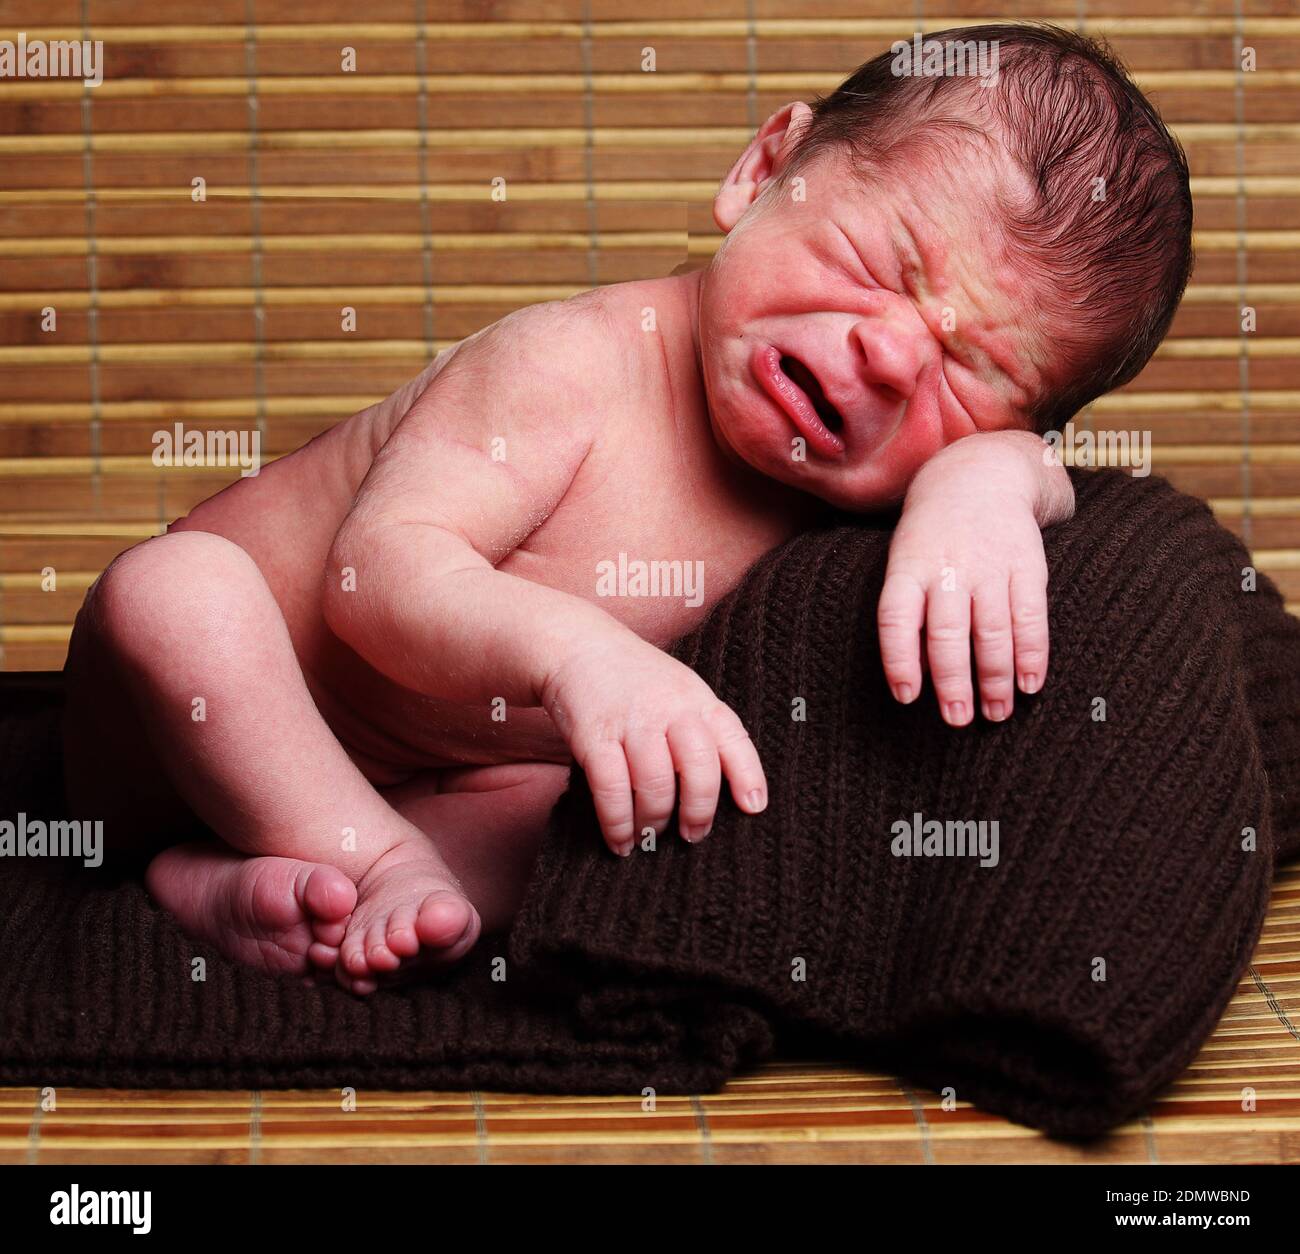 crying baby with wooden background Stock Photo